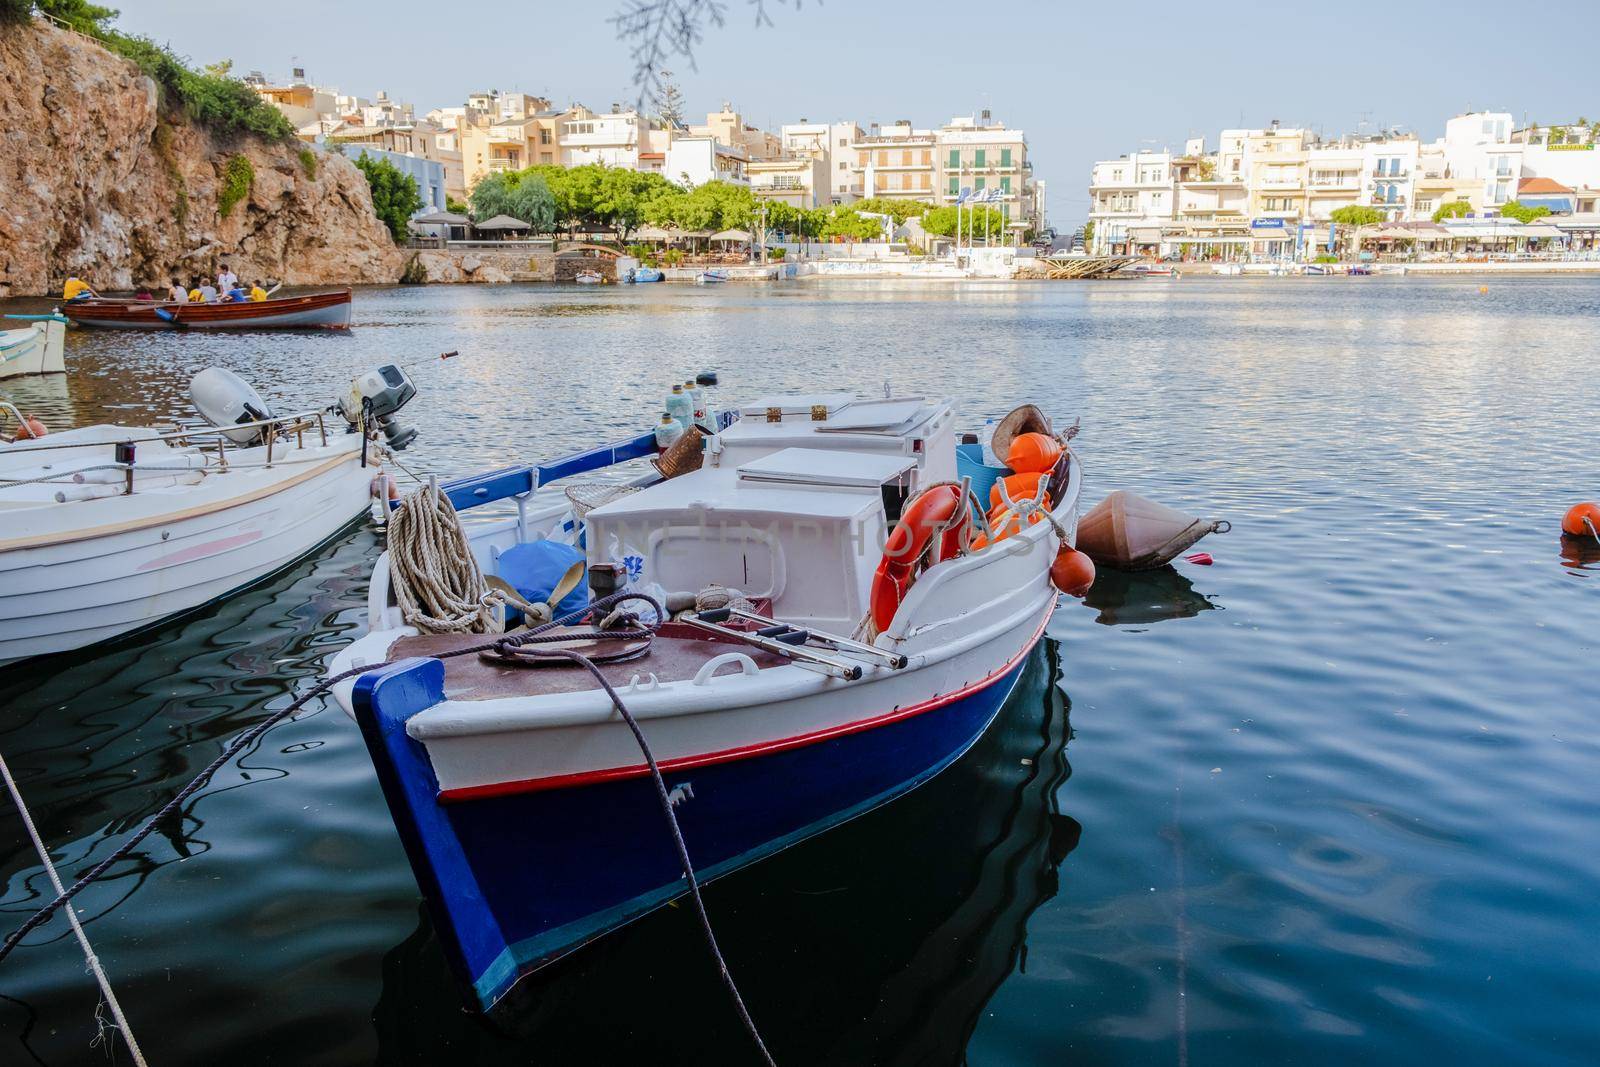 Agios Nikolaos, Crete, Greece. Agios Nikolaos is a picturesque town in the eastern part of the island Crete built on the northwest side of the peaceful bay of Mirabello by fokkebok